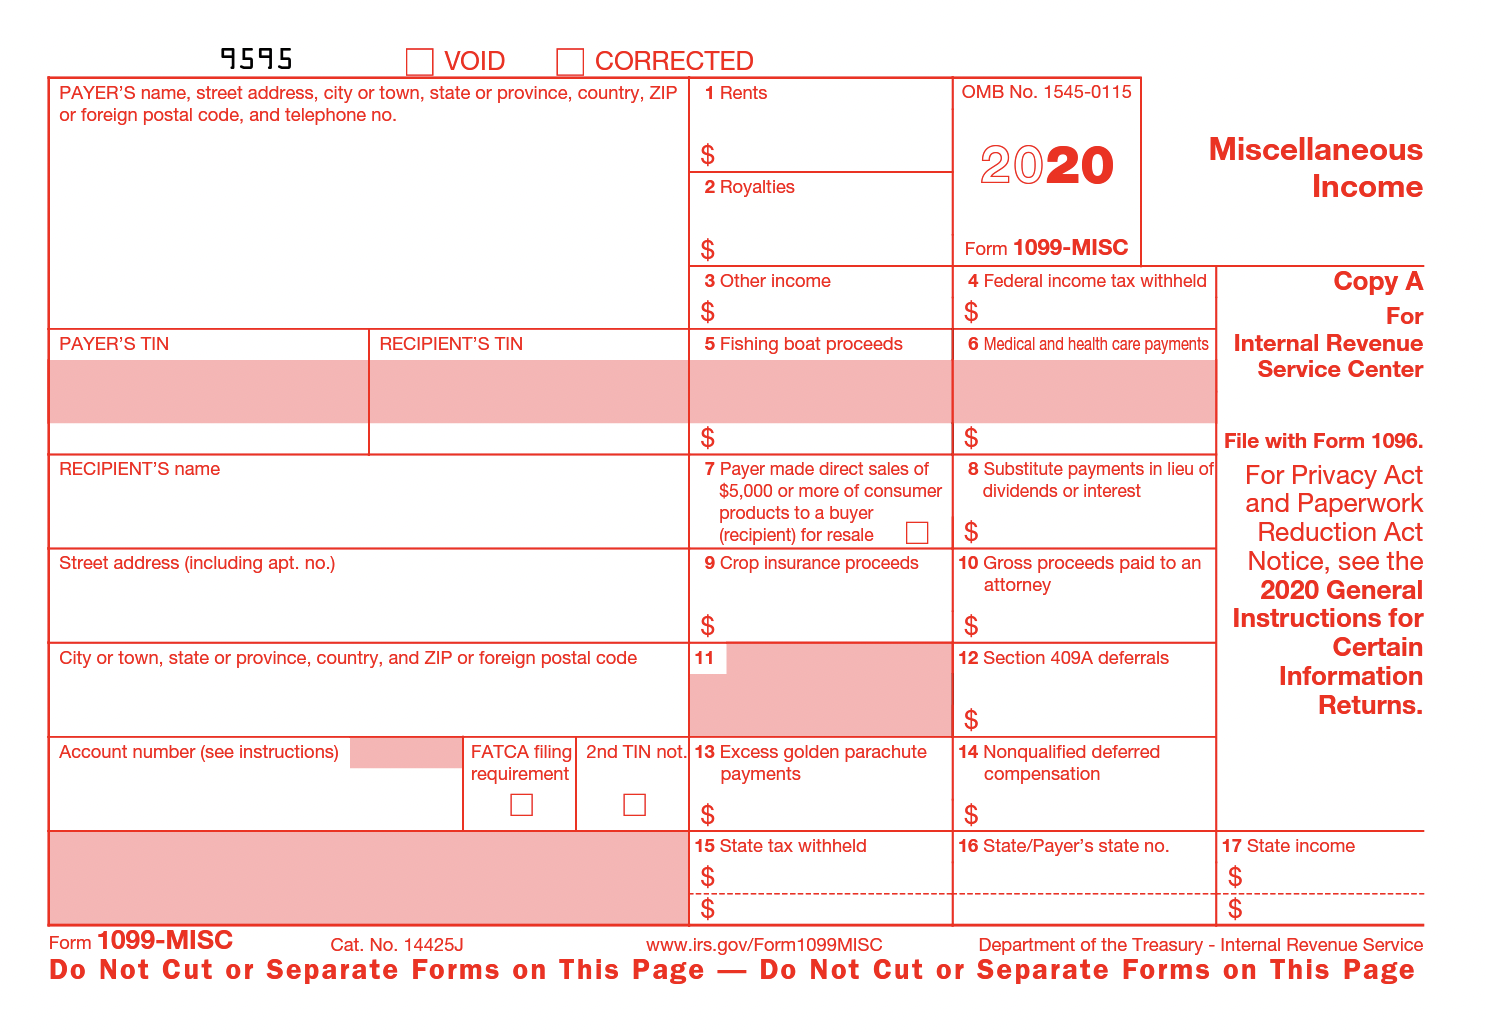 2020 IRS Forms 1099